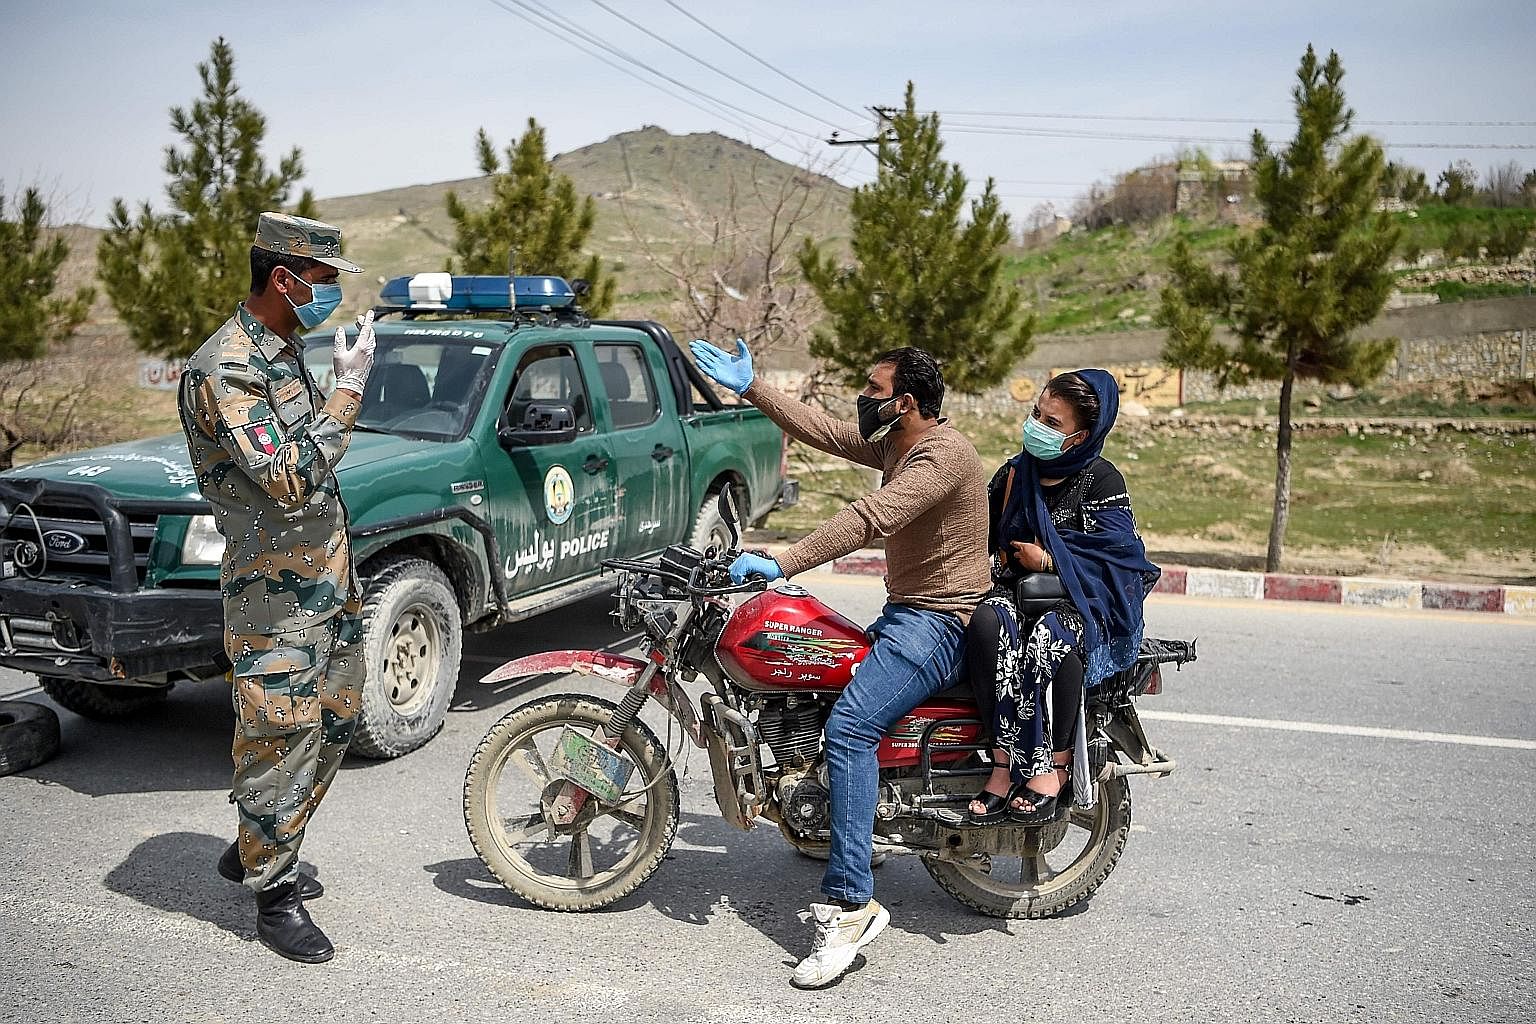 An Afghan security officer stopping motorists at a checkpoint in Kabul on April 8, during a government-imposed lockdown as a preventive measure against Covid-19. The virus may have brought much of the world to a standstill, but it has not ended confl